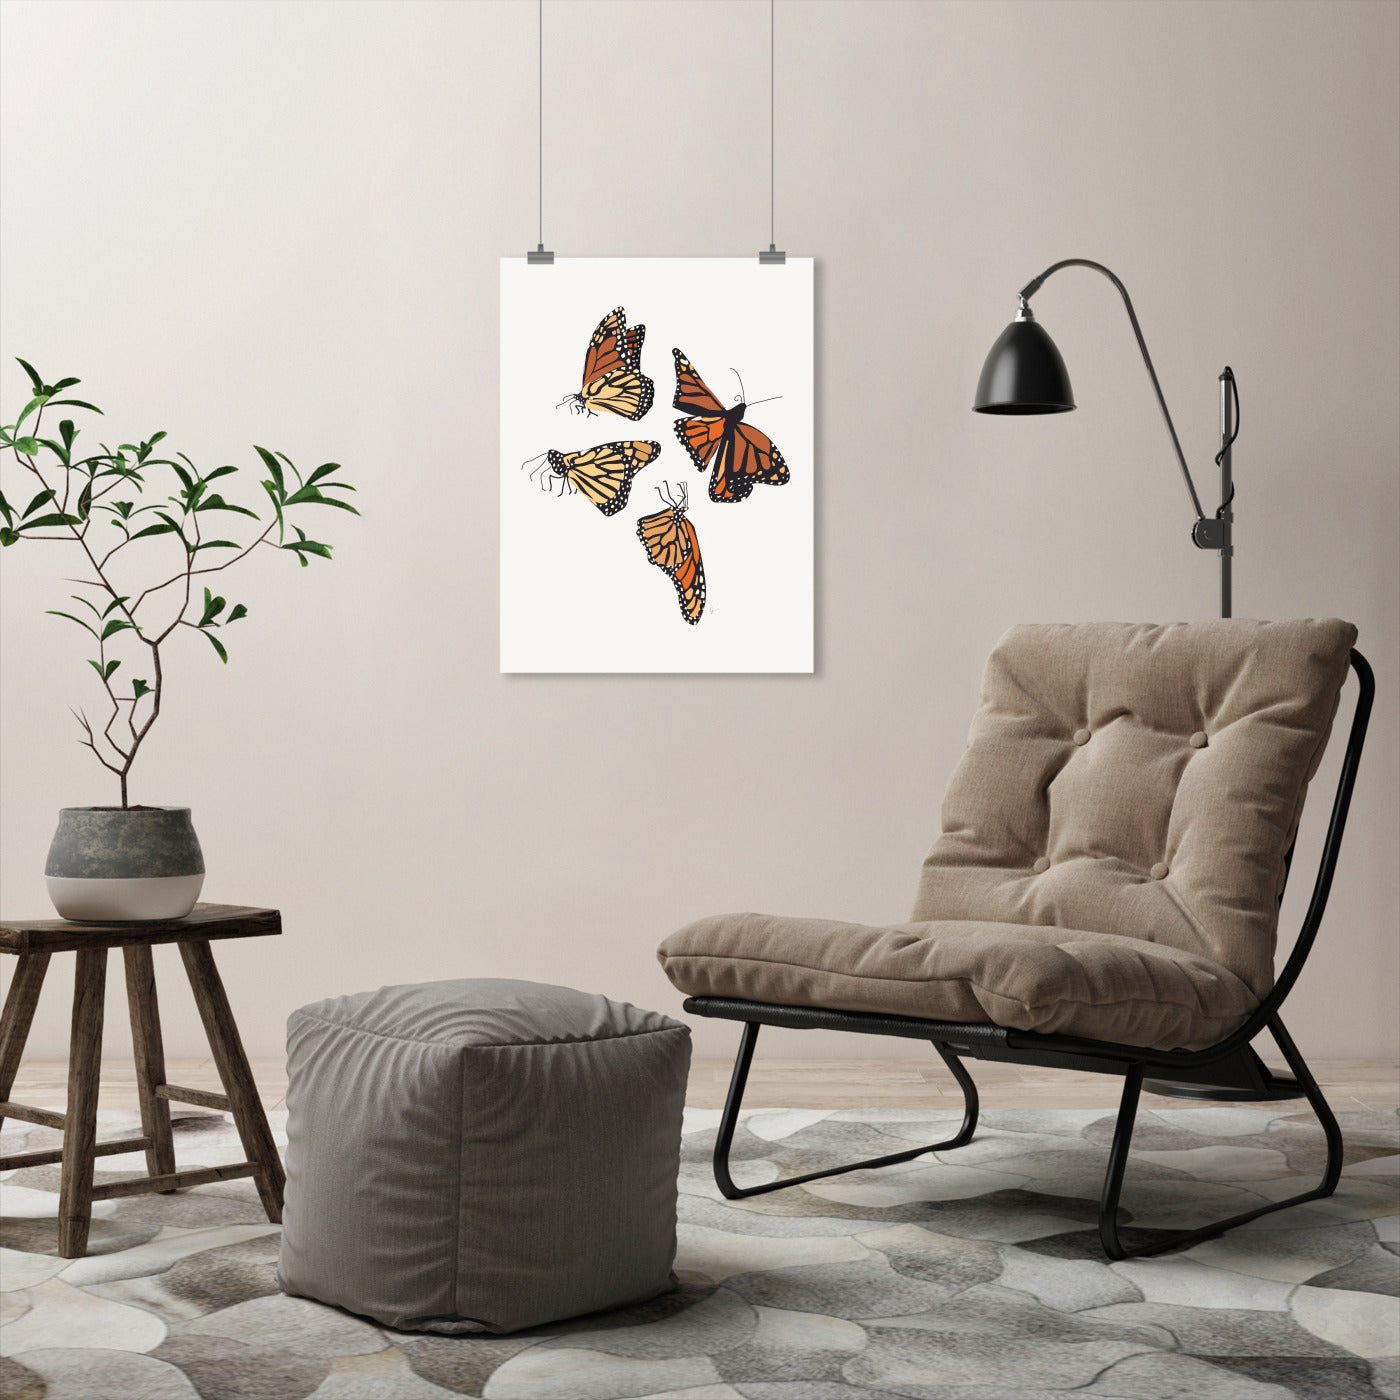 Americanflat Animals 22x28 Poster - Monarch Butterfly Wall Art